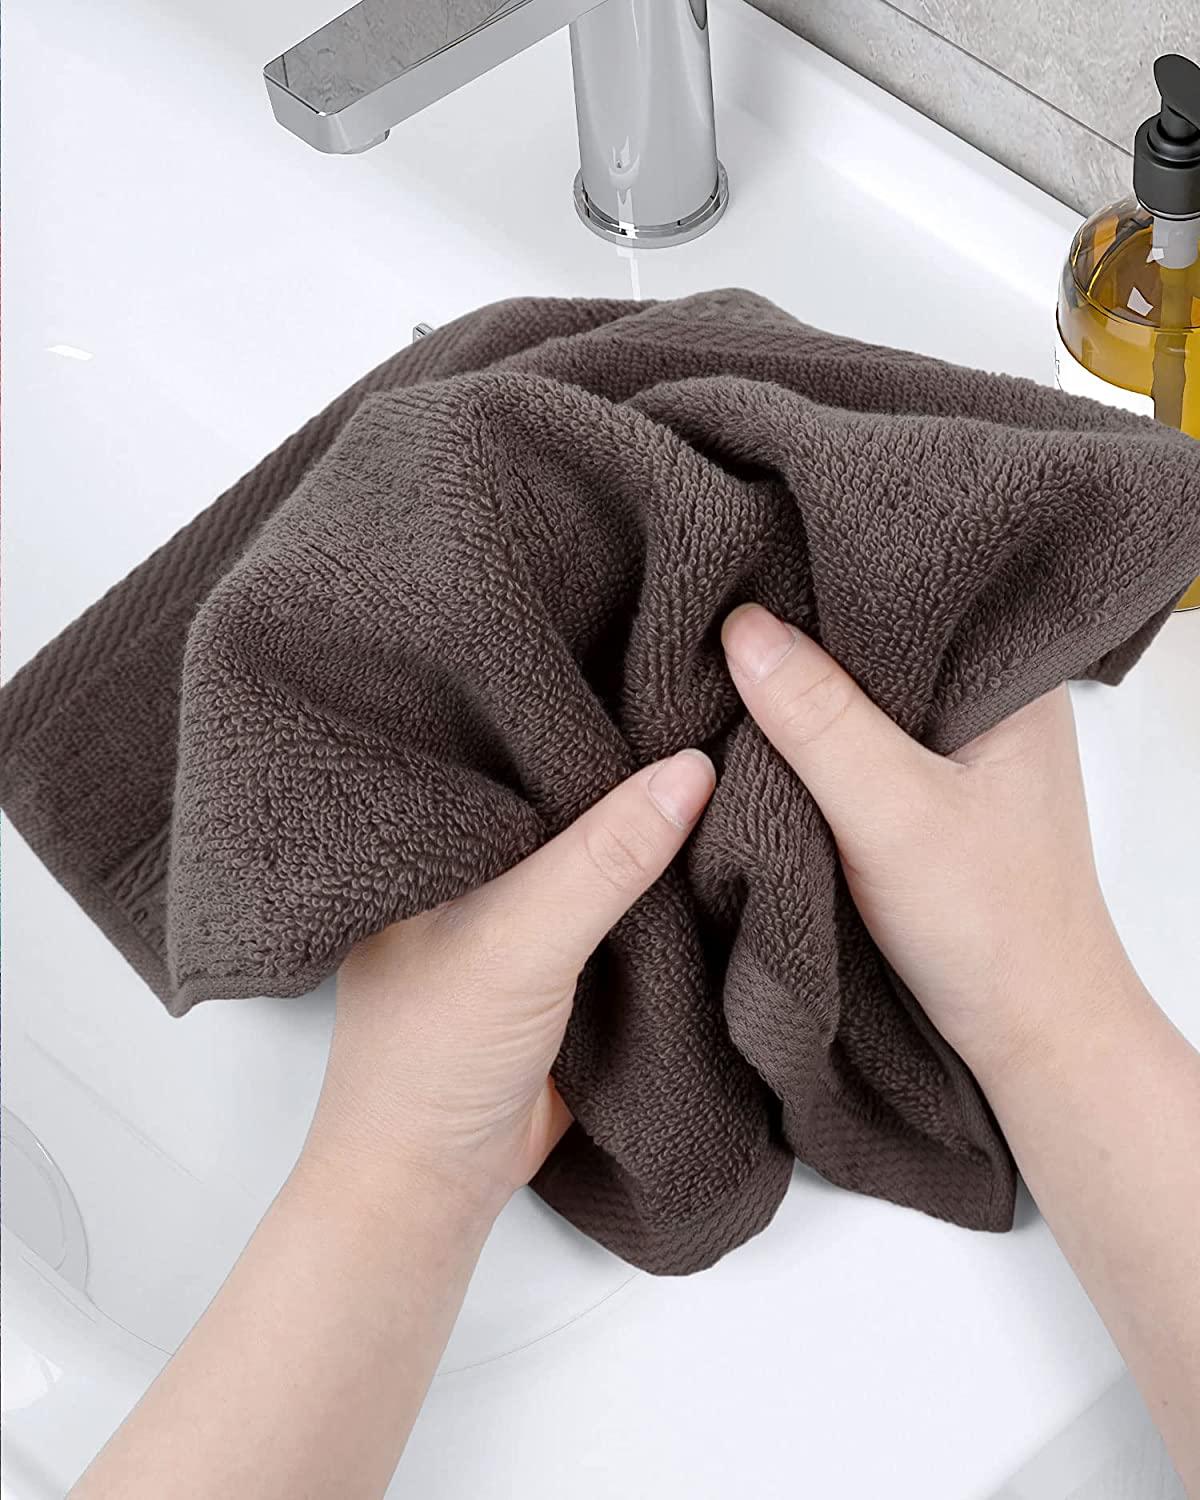 Cleanbear Washcloths - Wash Cloths, 13 x 13 Inches, 3 Colors 6-Pack